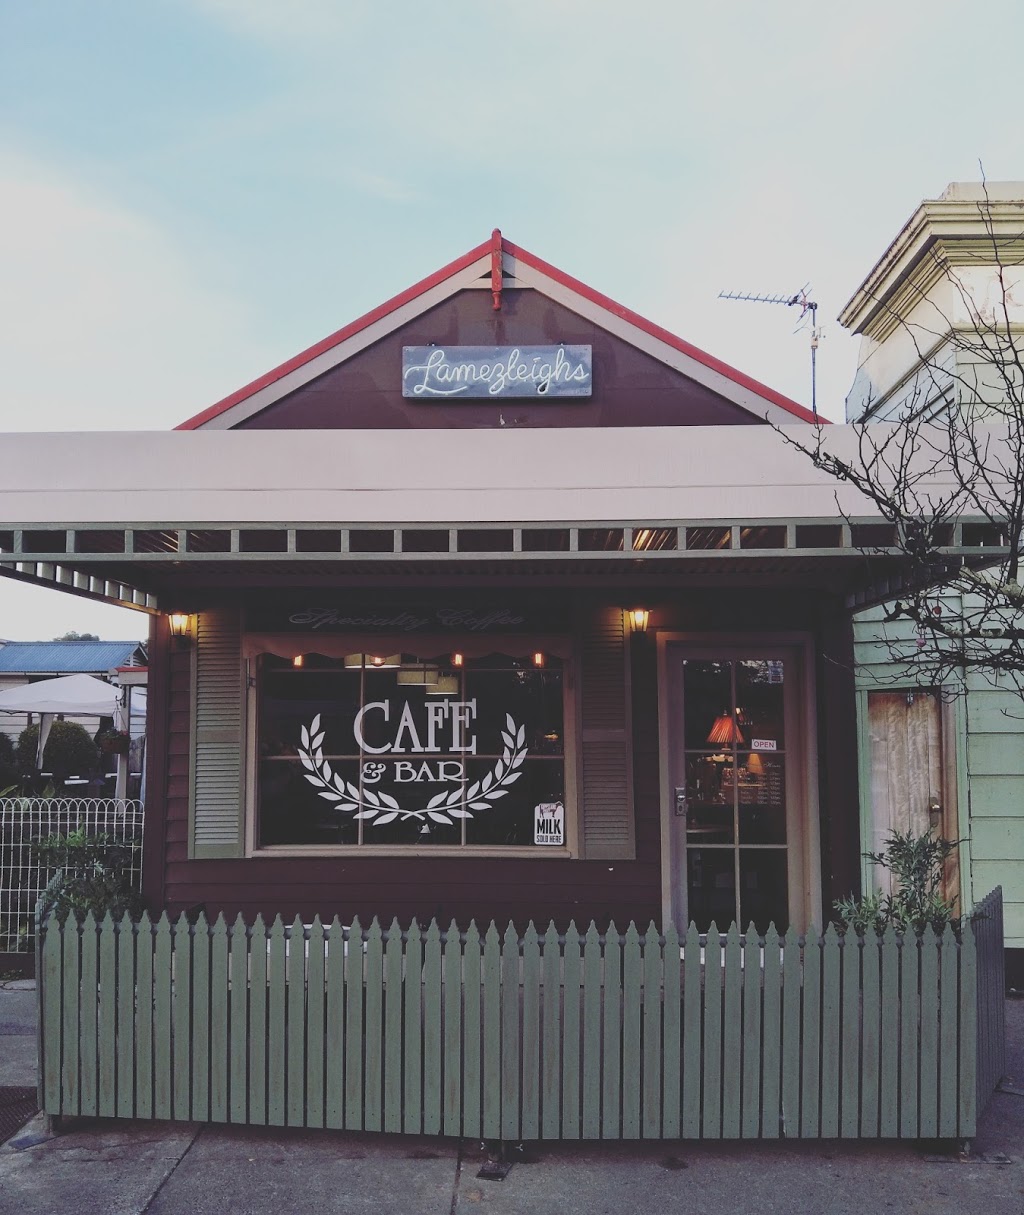 Lamezleighs cafe & bar | cafe | 62 Ridgway, Mirboo North VIC 3871, Australia | 0356682455 OR +61 3 5668 2455